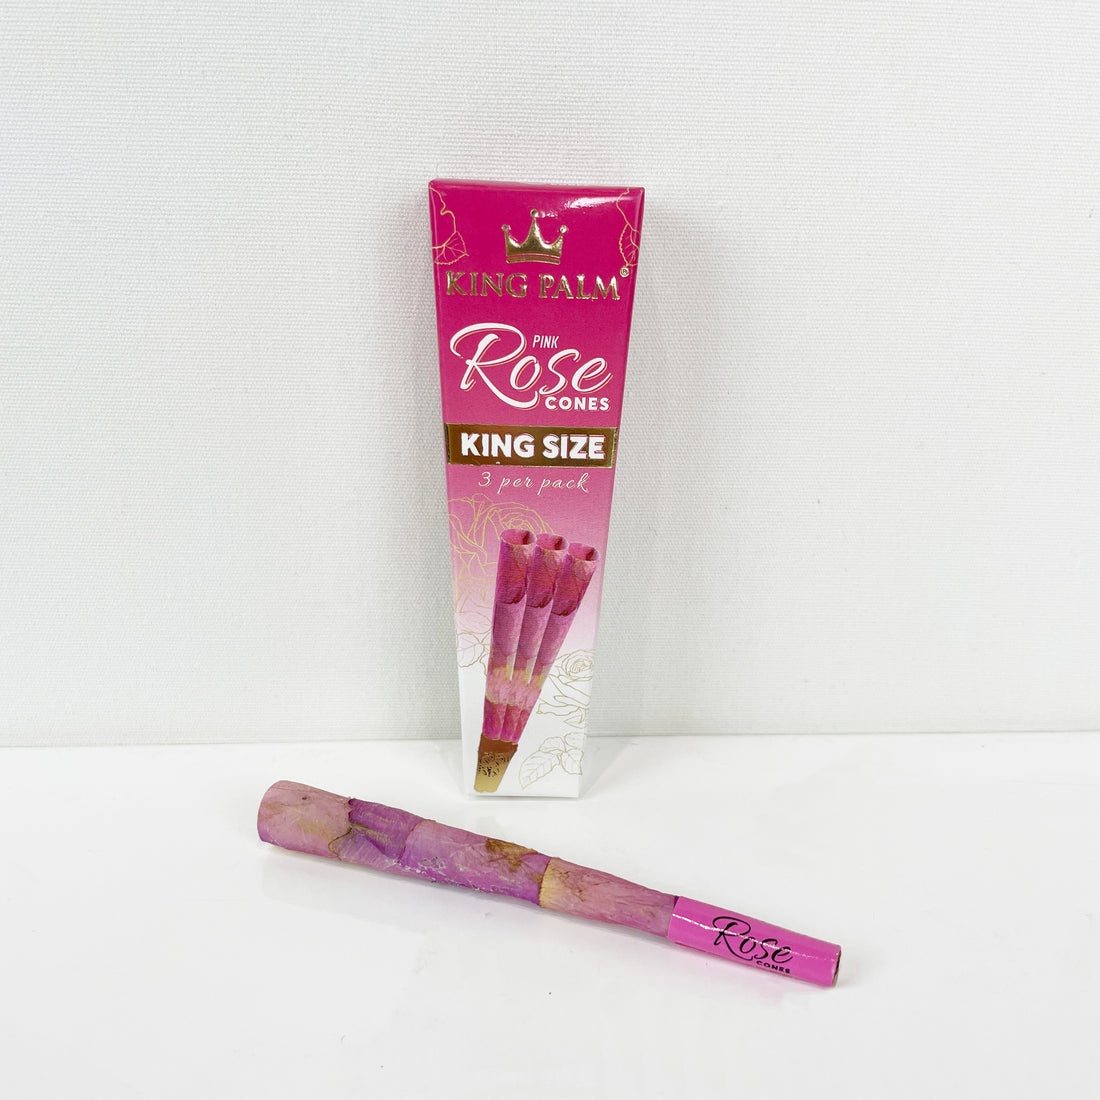 King palm 3 pack rose cones bliss shop chicago